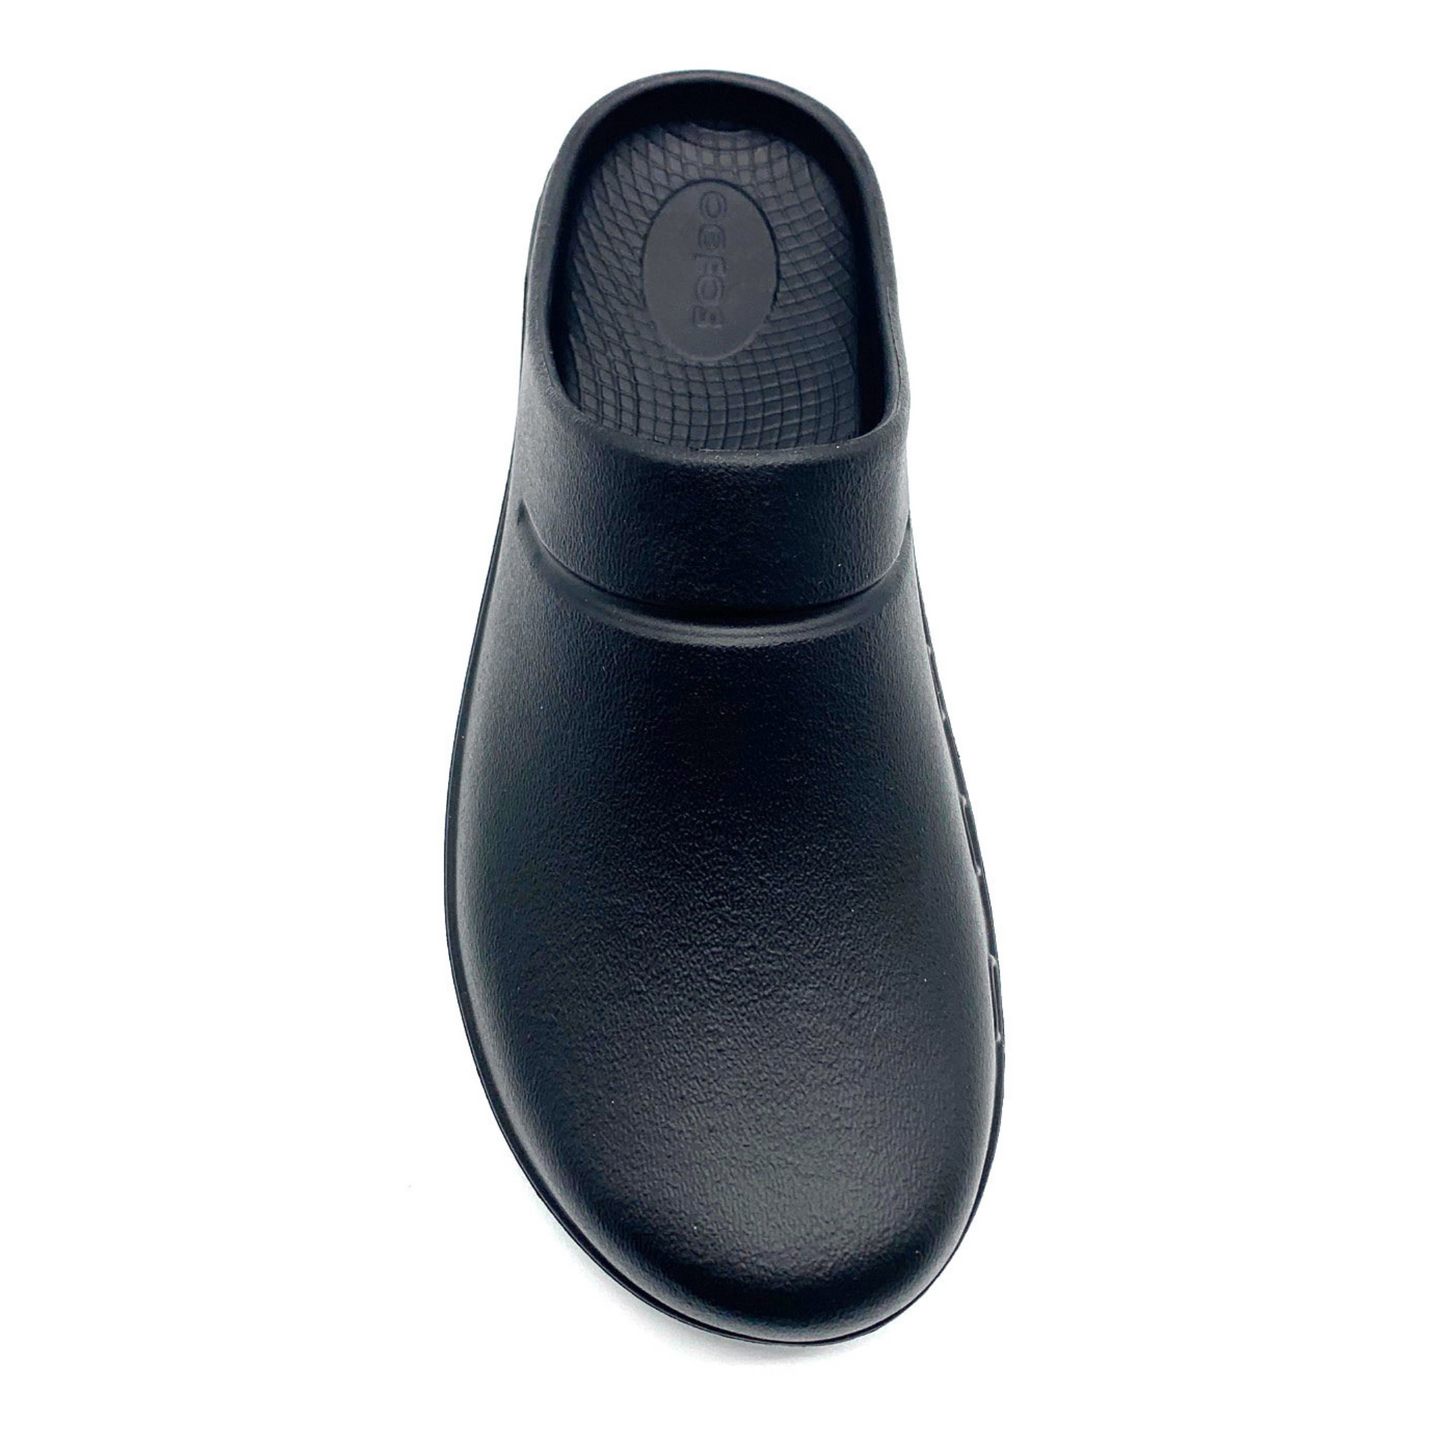 The front of the black clog is pictured showing a slight band of relief around the top ankle.